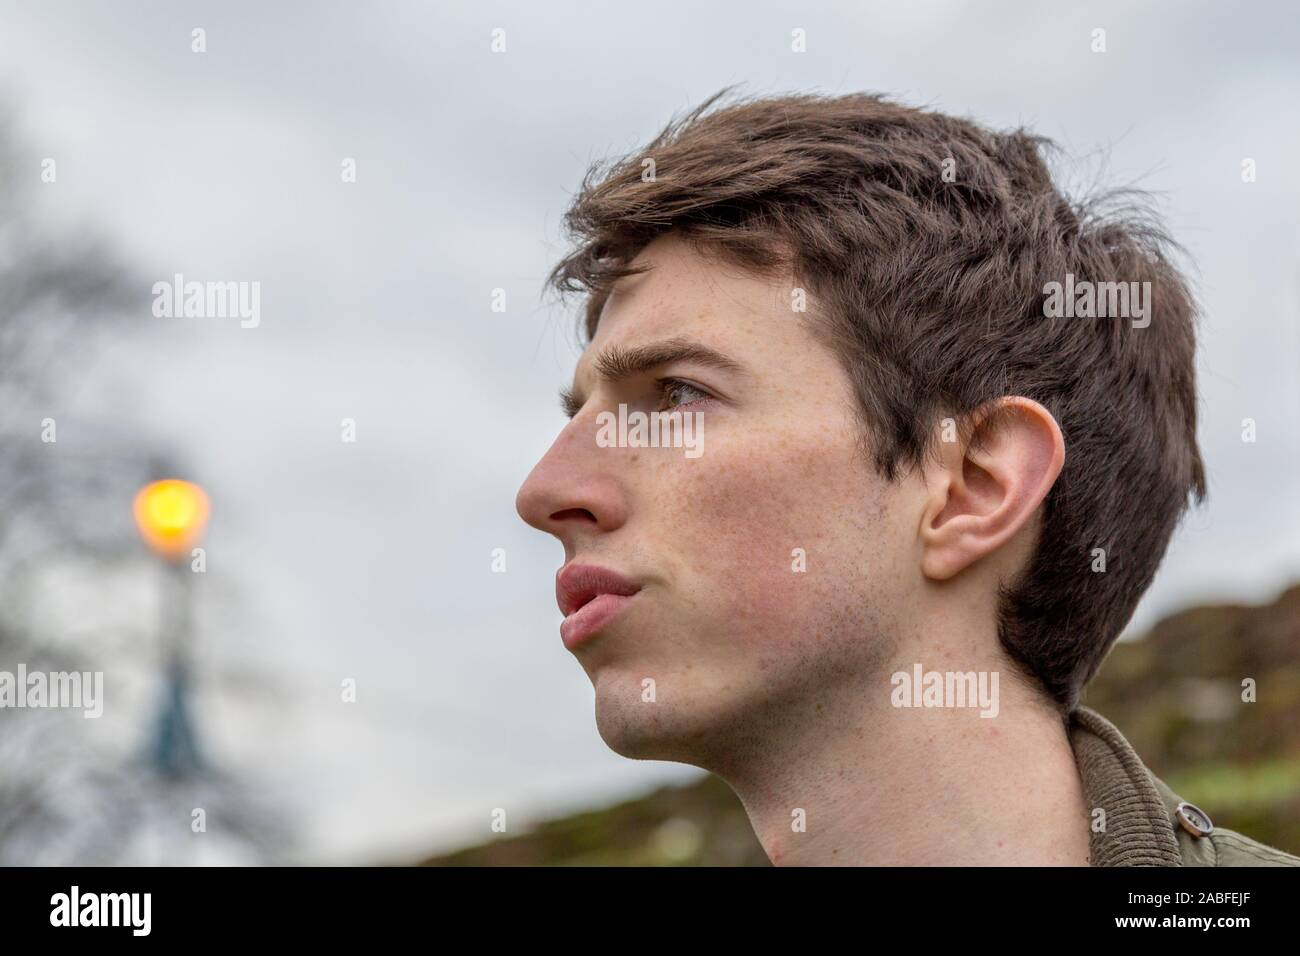 A young man in his late teens or early twenties stands outdoors with a focused serious expression as he looks into the distance. Stock Photo